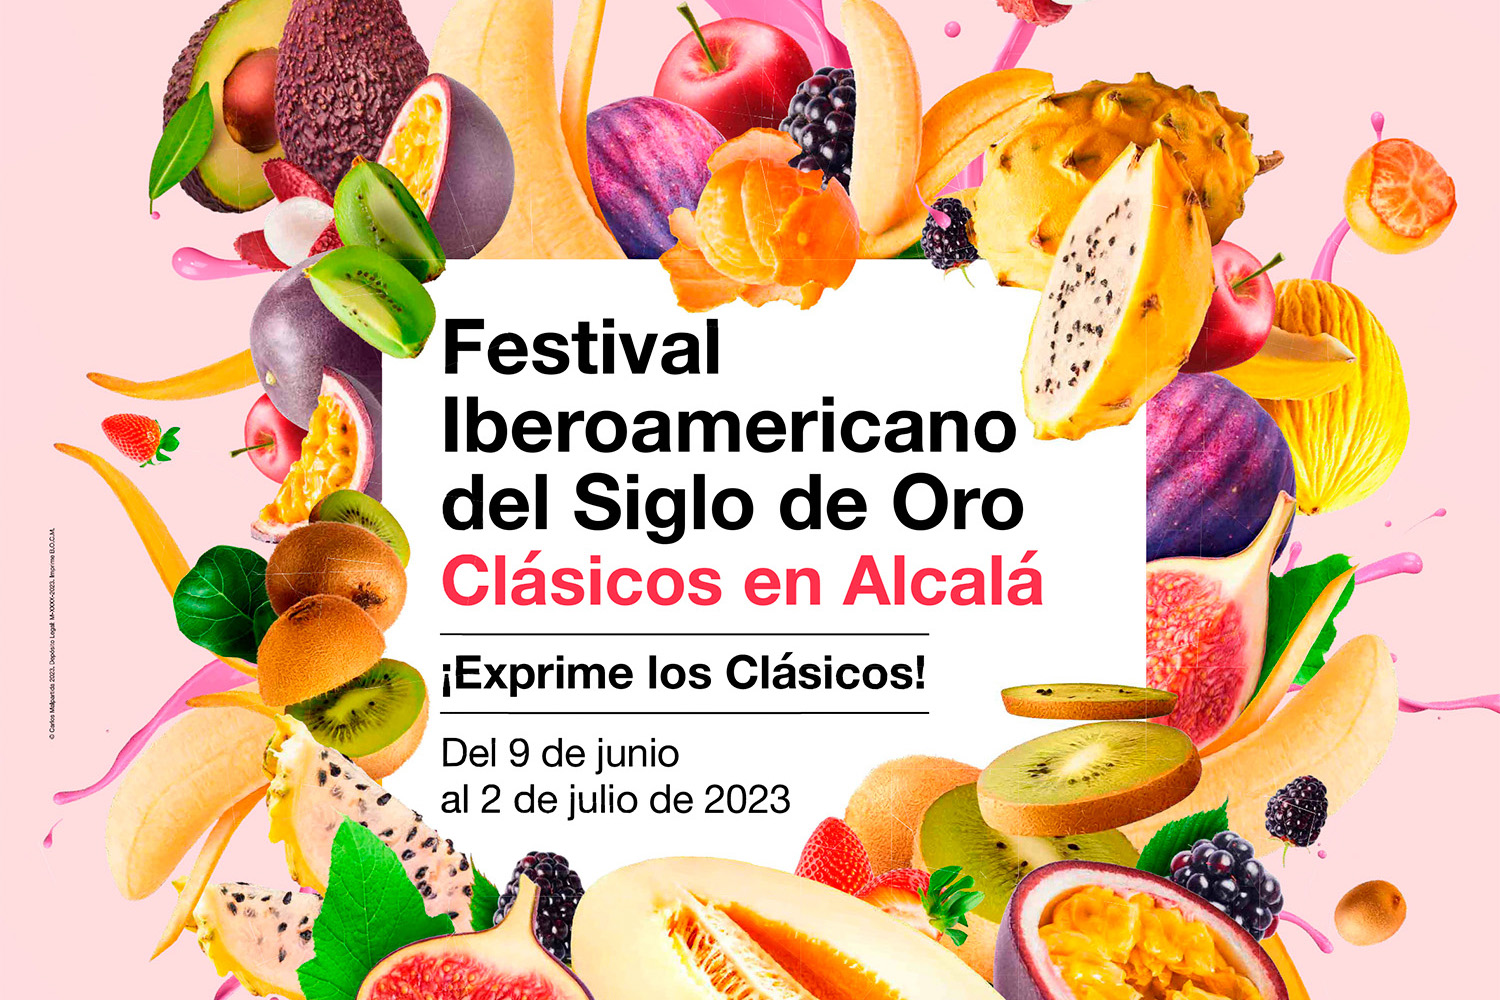 XXII edition of the Iberoamerican Festival of the Golden Age. Classics in Alcalá